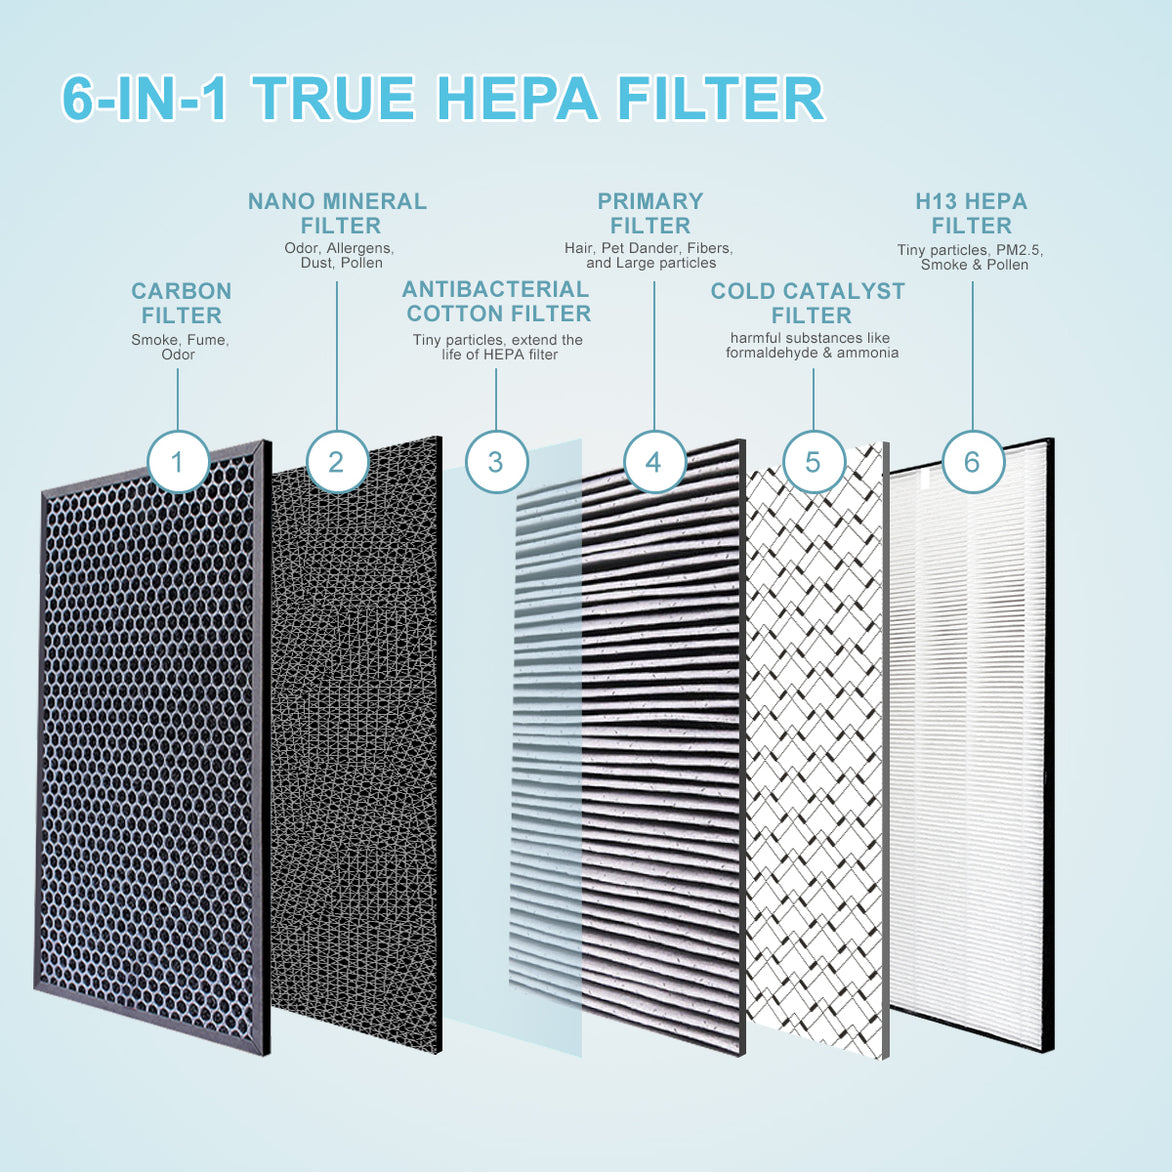 Air Purifiers for Home Large Room, 878 Sq Ft True HEPA Technology Filter Removal 99%+ for Pets Dander Smoke Odor Dust Pollen,Bedroom, Room, Office, Classroom